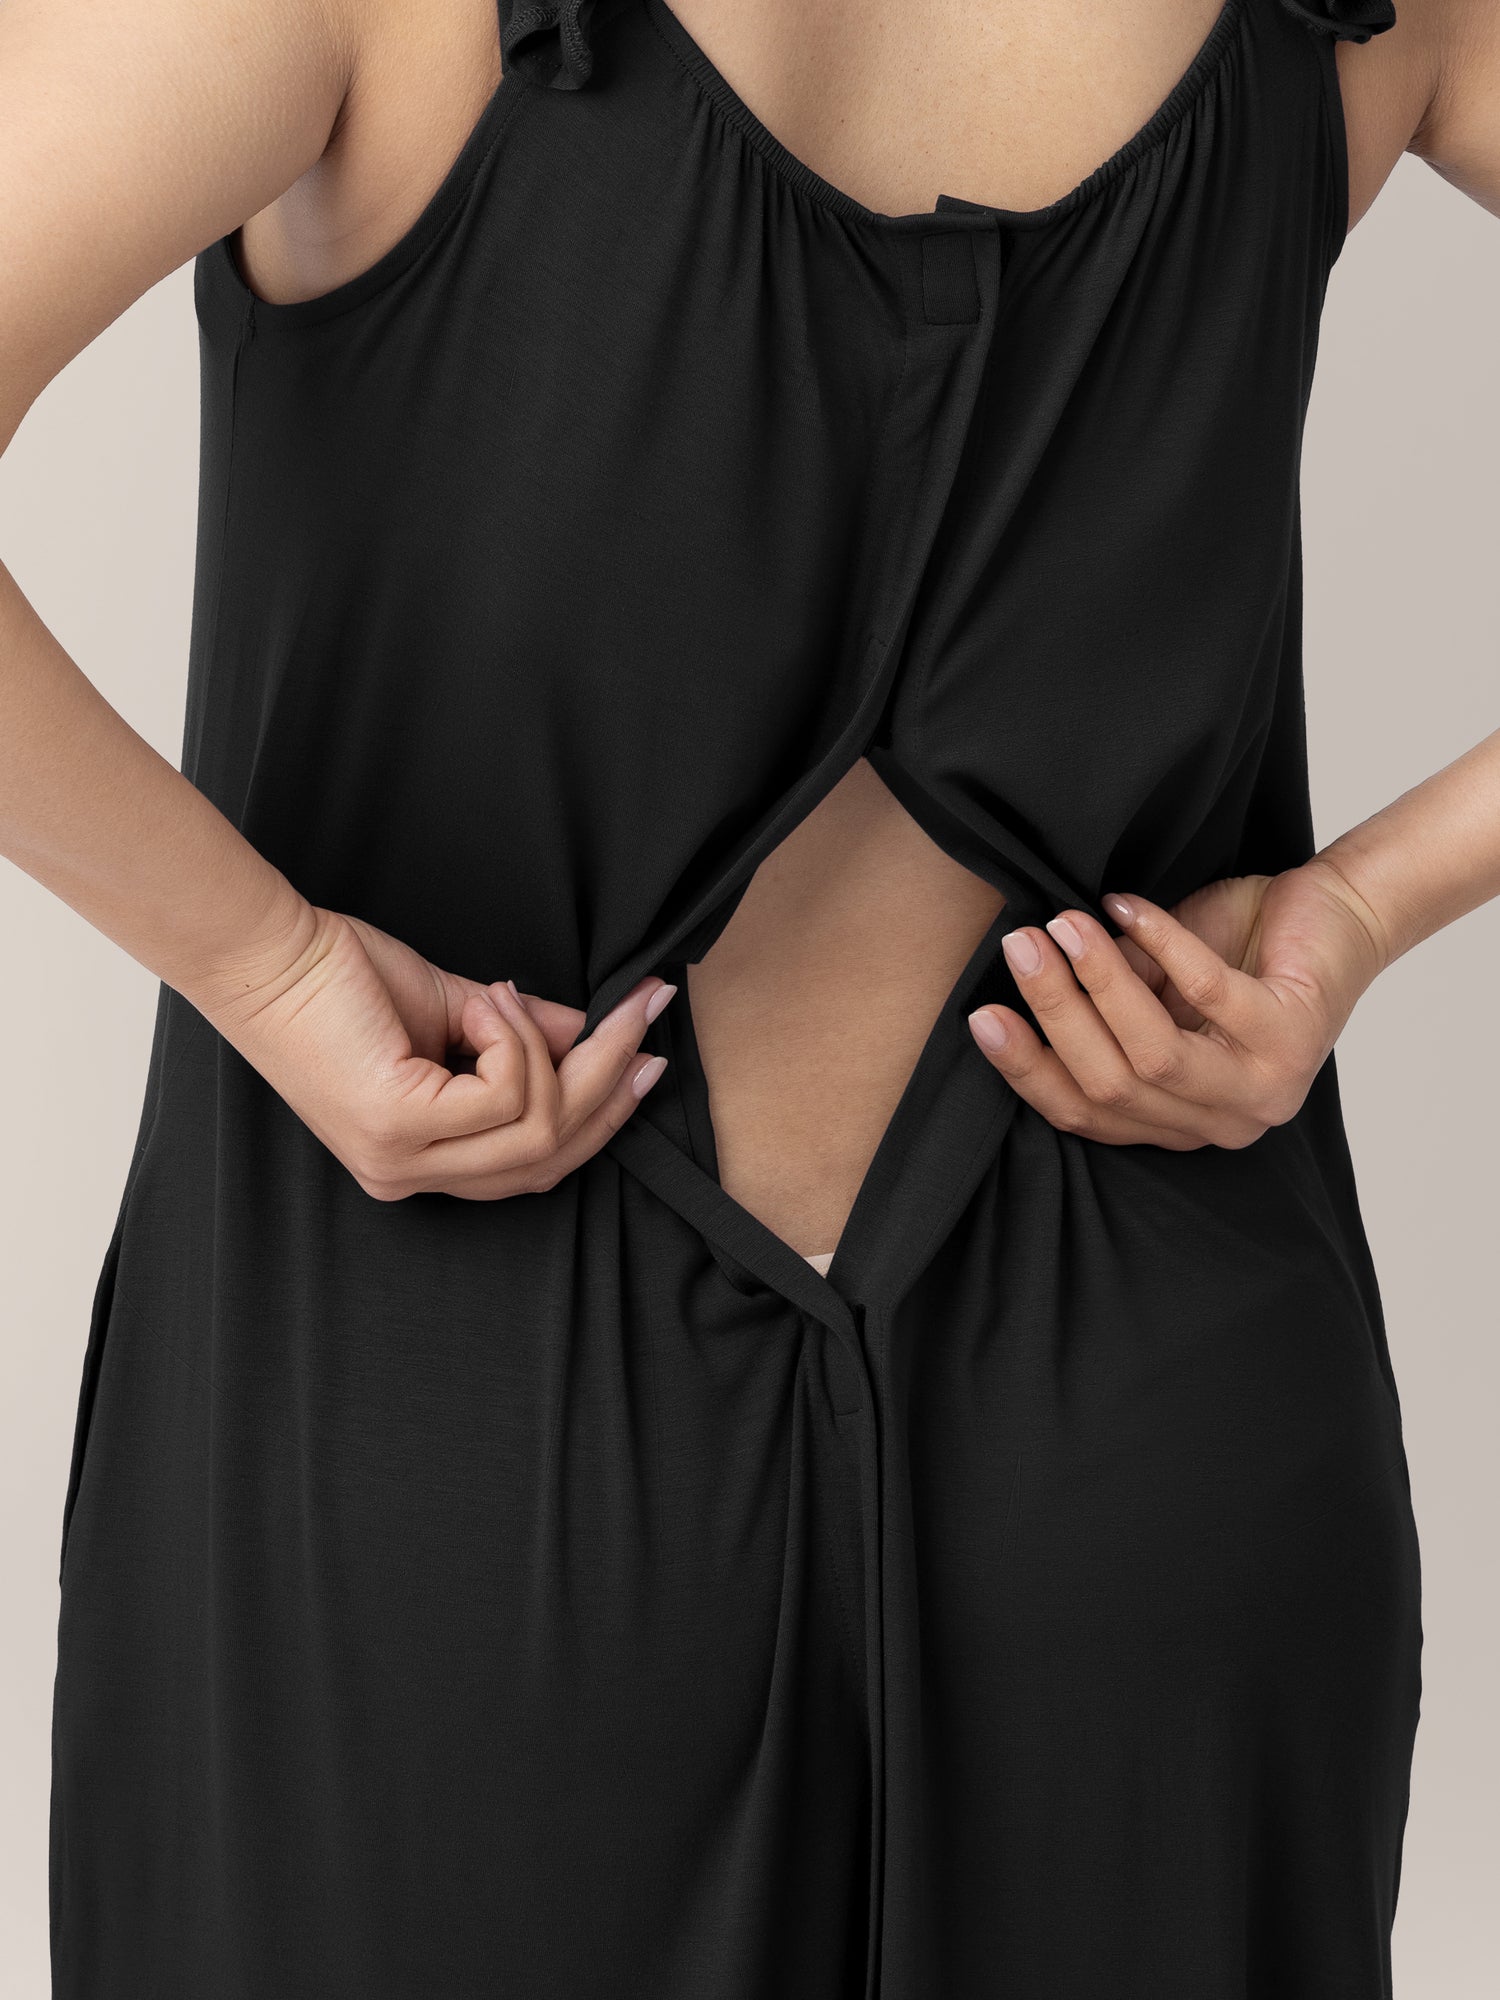 Closeup of the epidural access on the Ruffle Strap Labor & Delivery Gown in Black